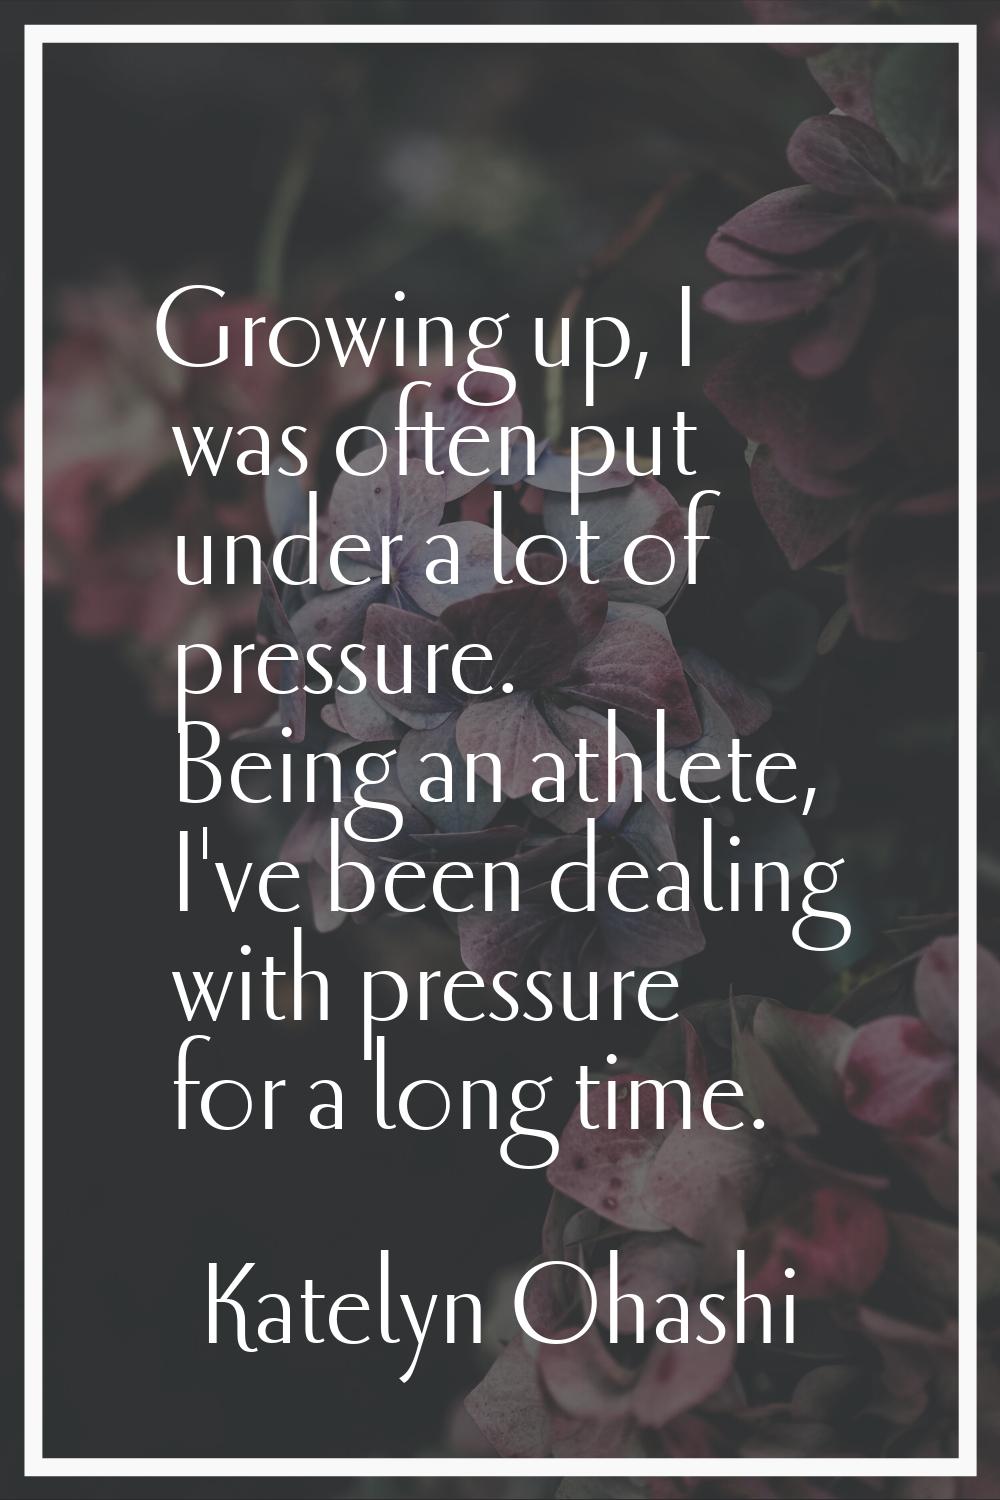 Growing up, I was often put under a lot of pressure. Being an athlete, I've been dealing with press